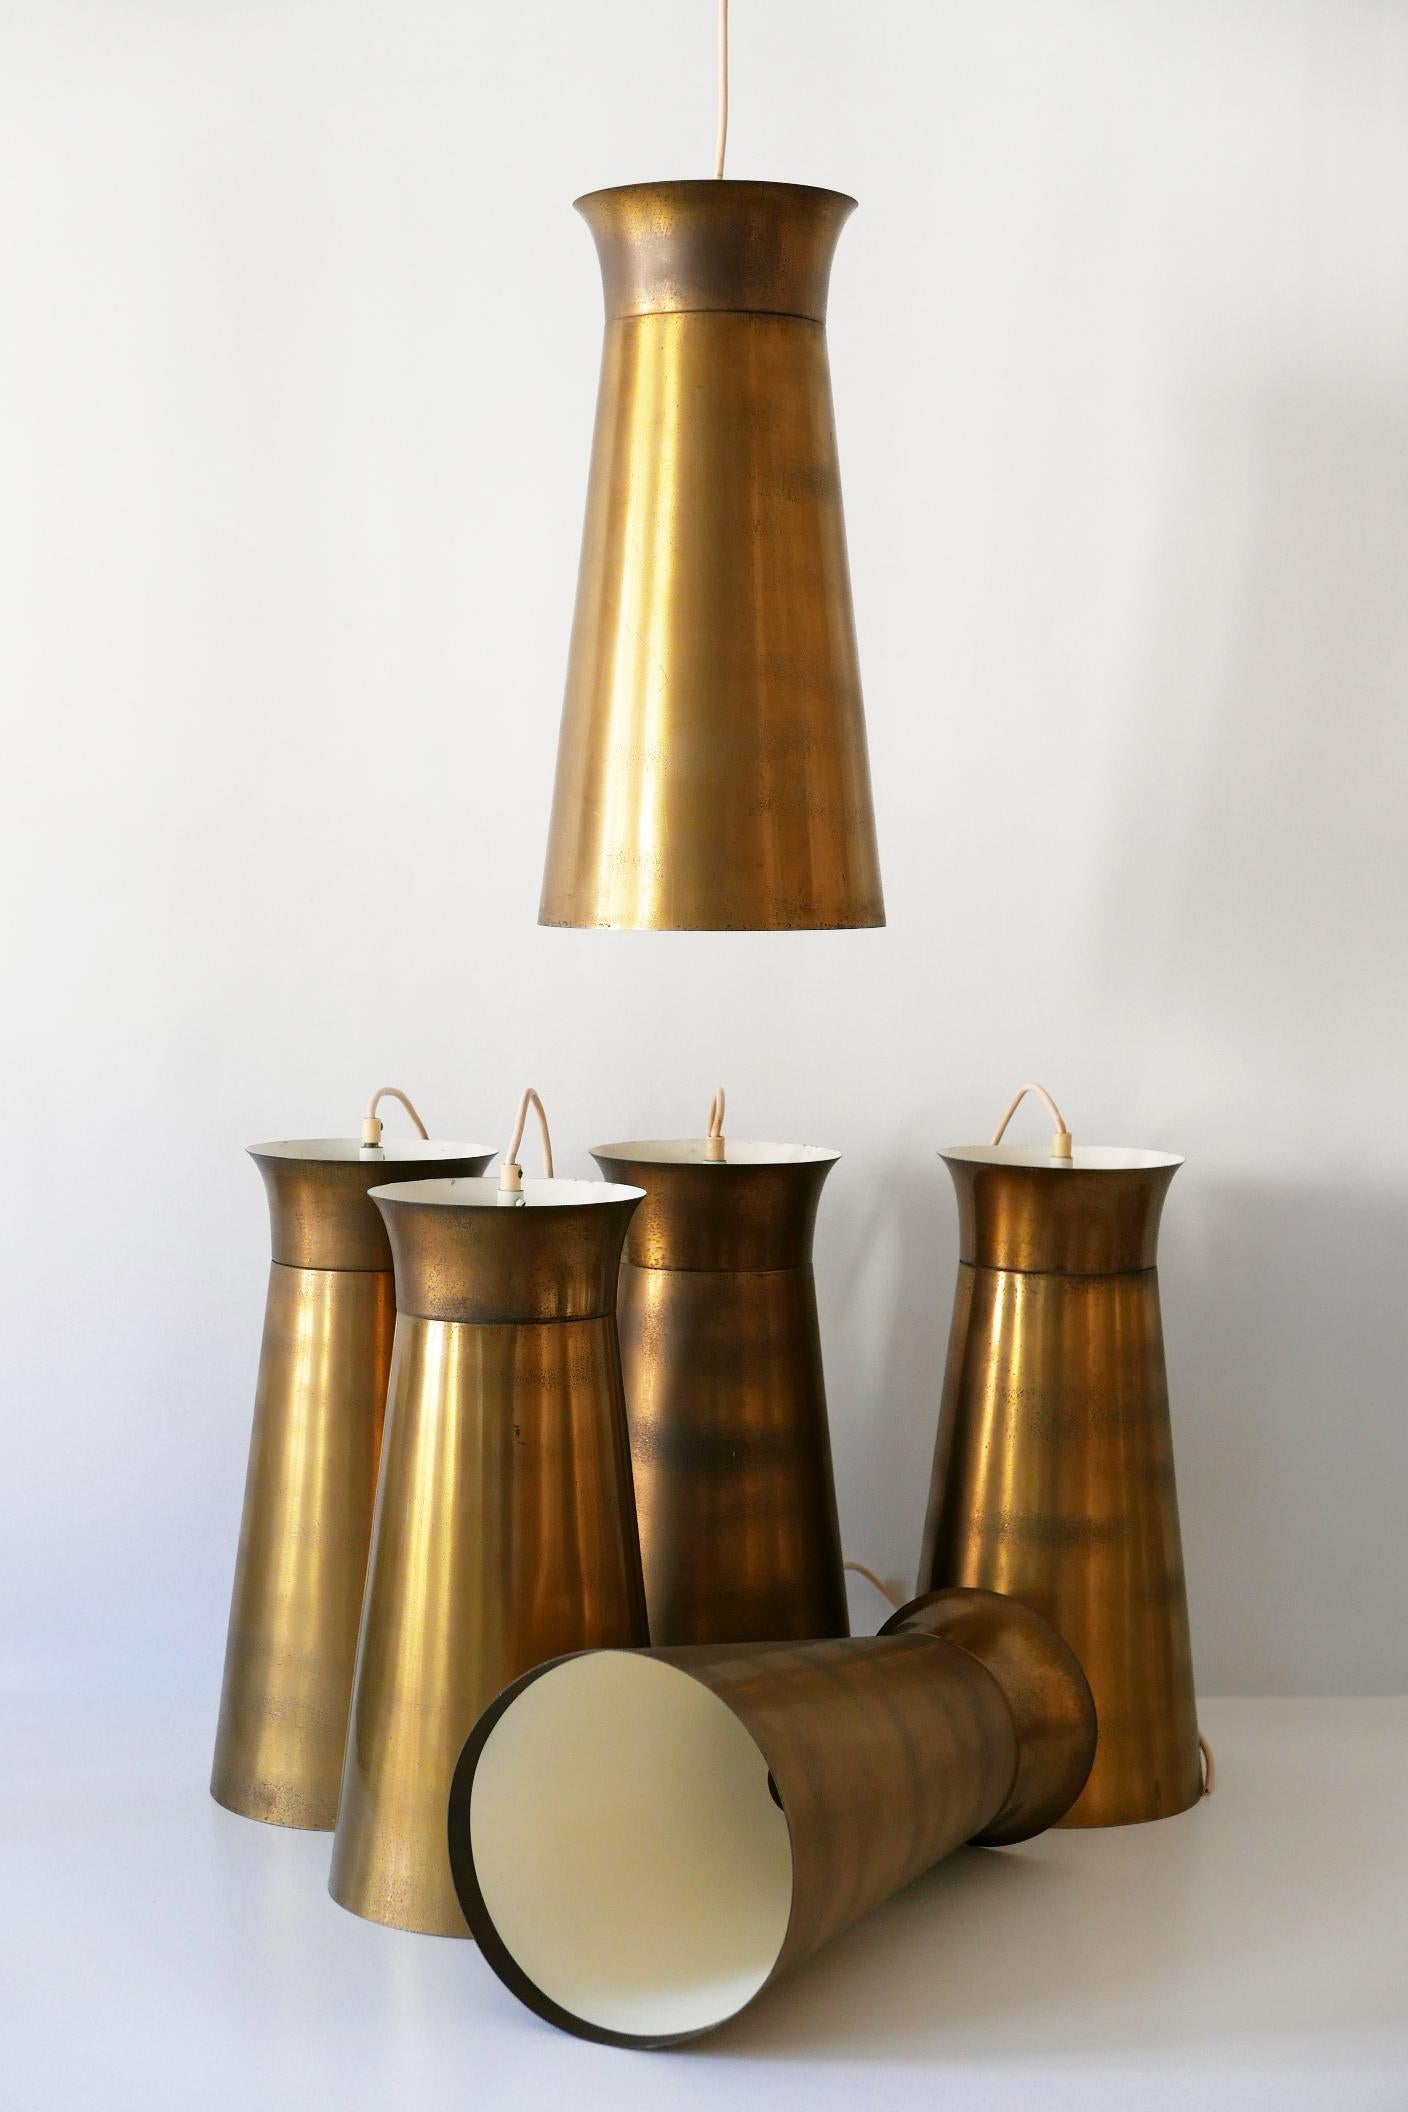 Elegant Mid-Century Modern Brass Pendant Lamps or Hanging Lights, 1950s, Germany For Sale 15